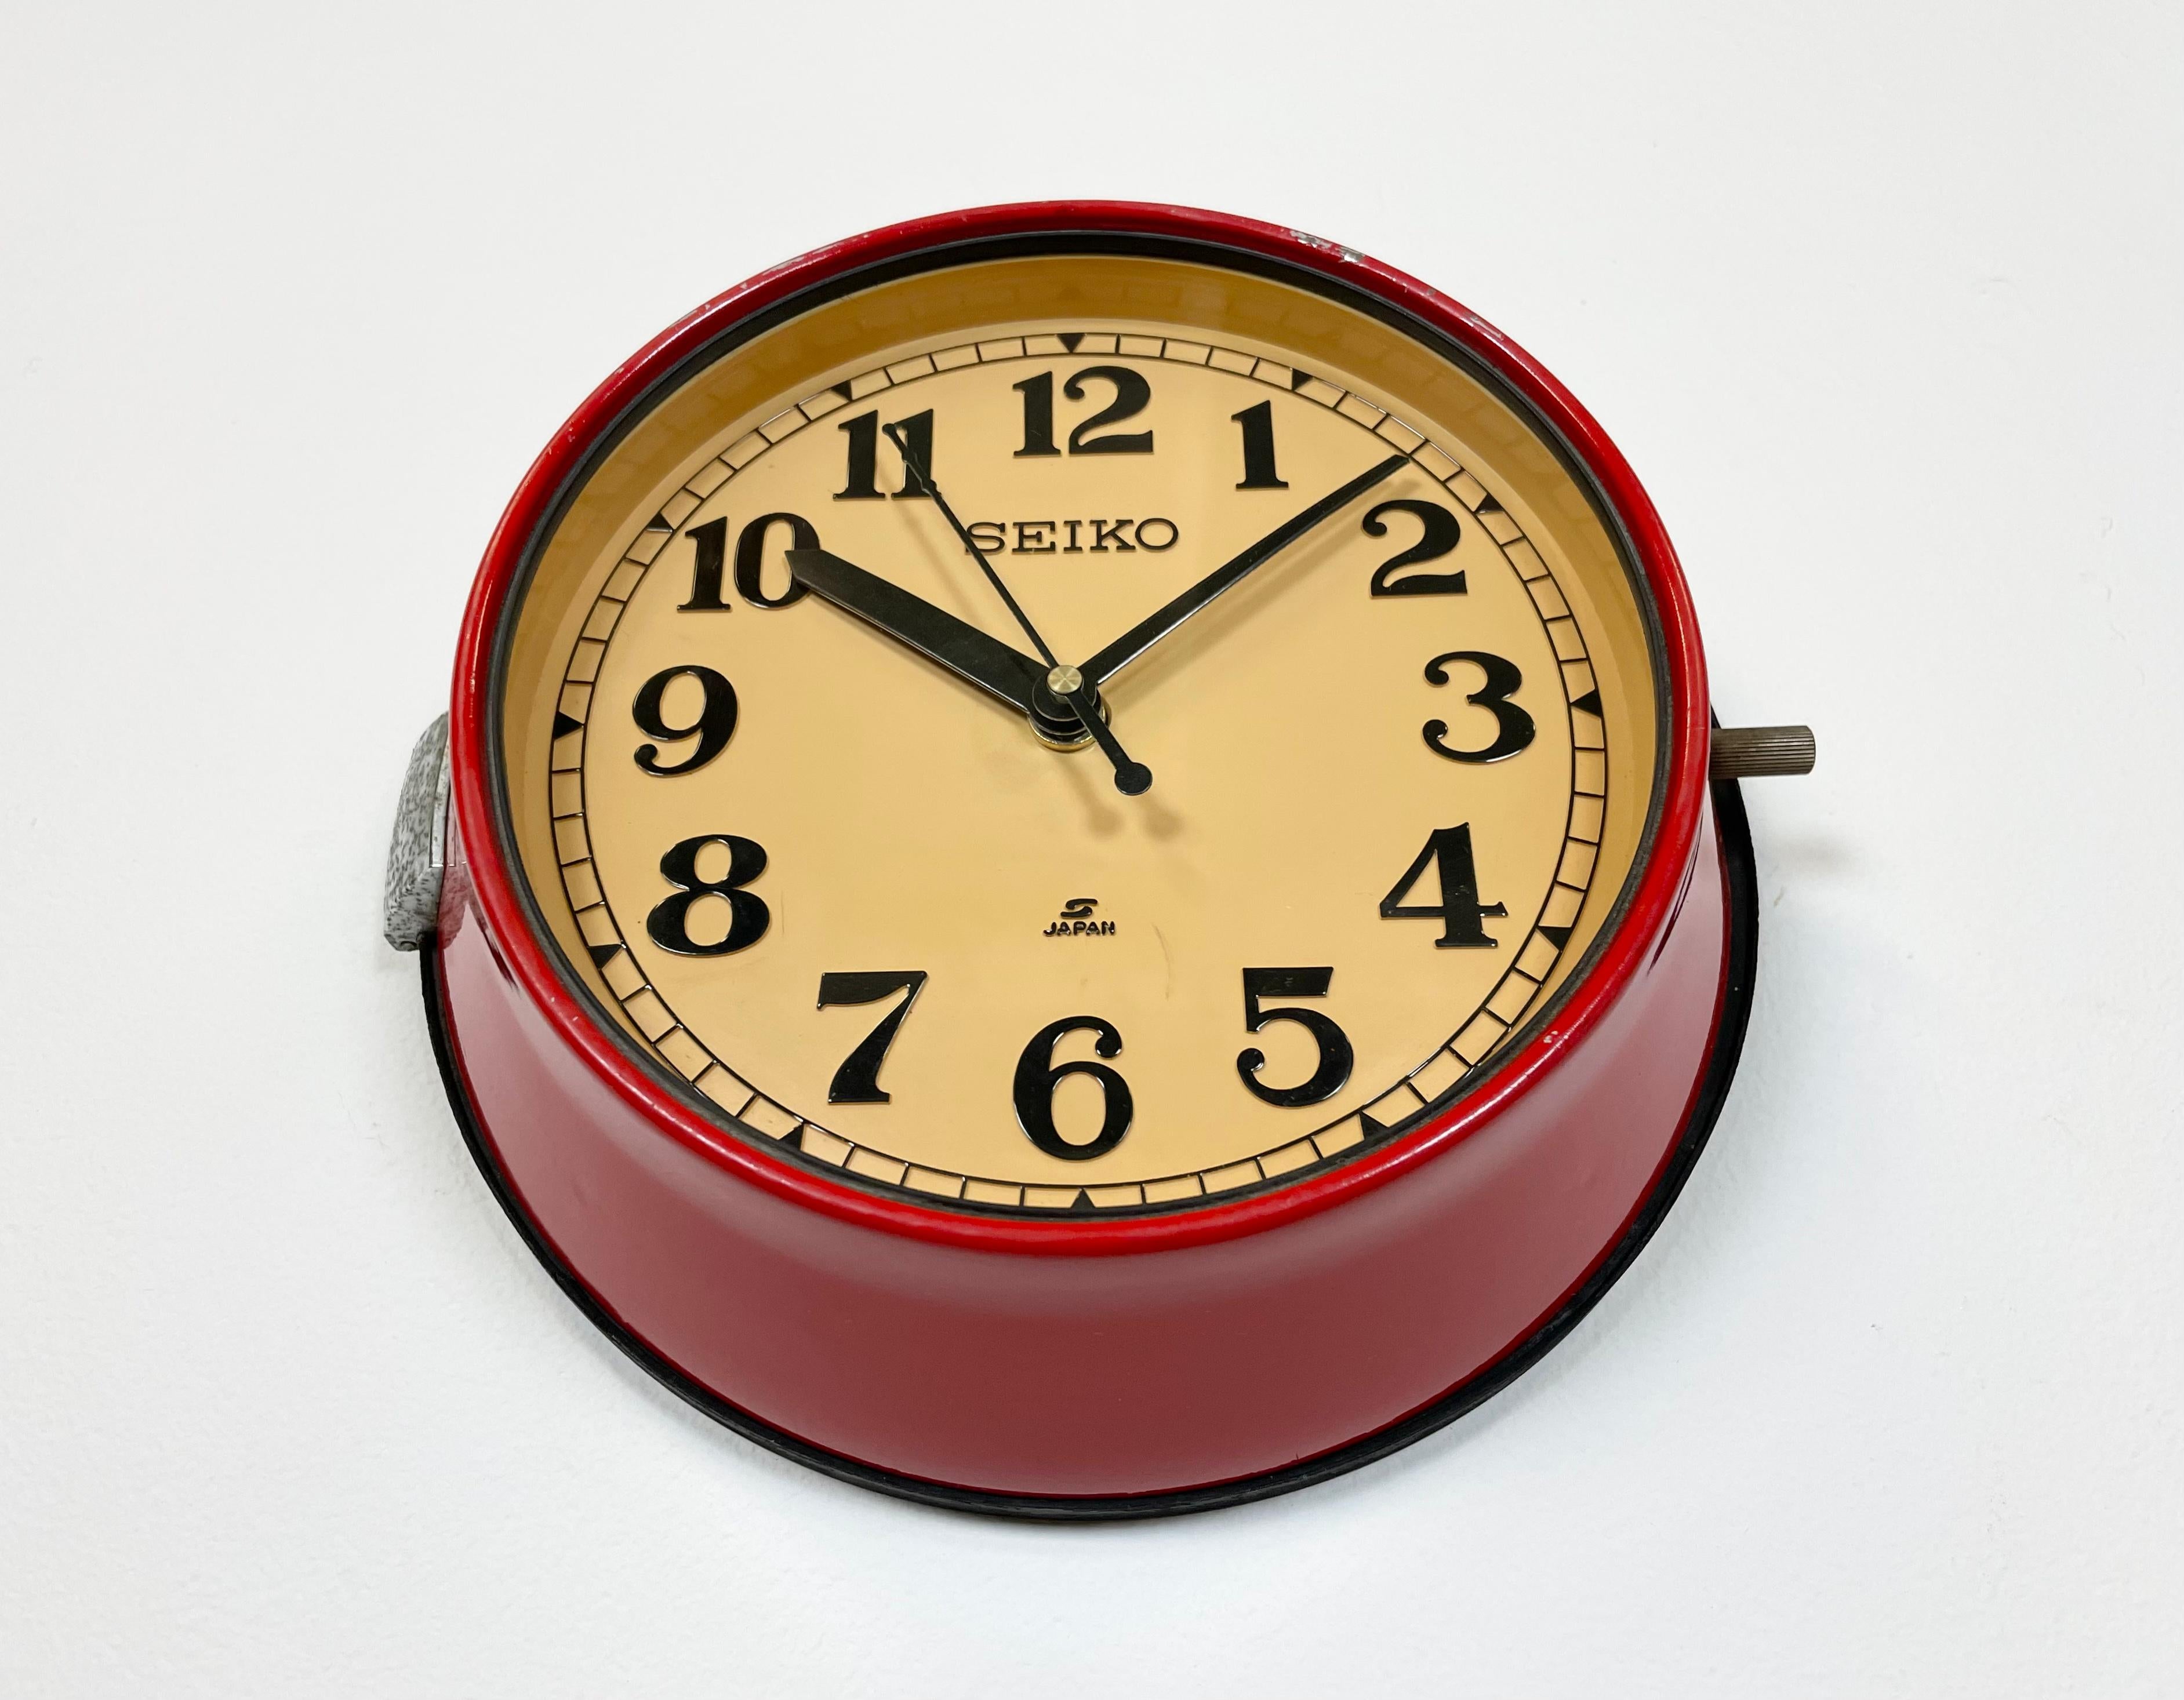 Industrial Vintage Red Seiko Navy Wall Clock, 1970s